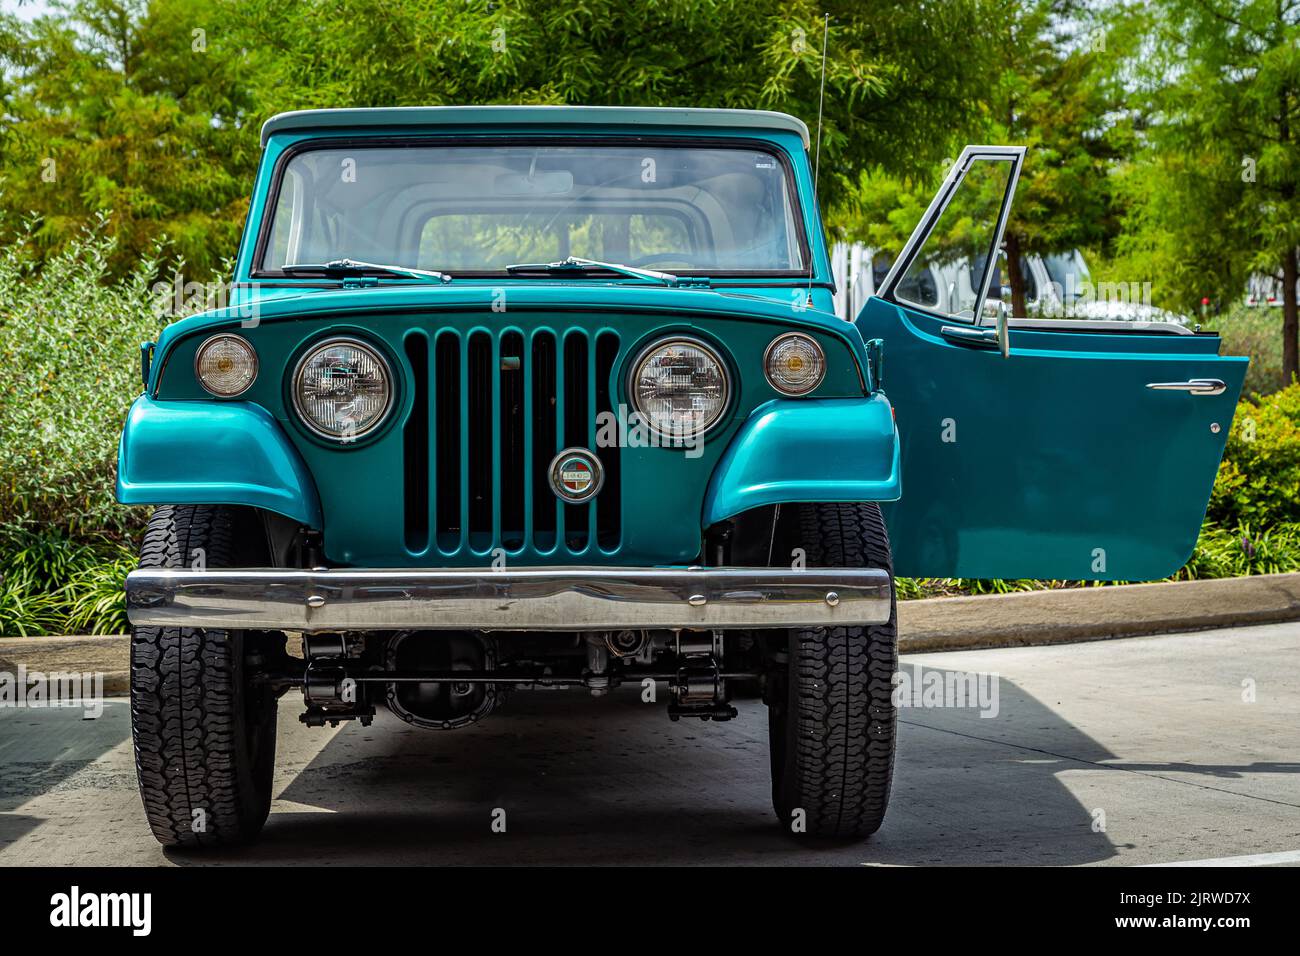 Pigeon Forge, TN - August 25, 2017: Low perspective front view of a Kaiser Jeep Jeepster Commando Station Wagon at a local enthusiast rally. Stock Photo